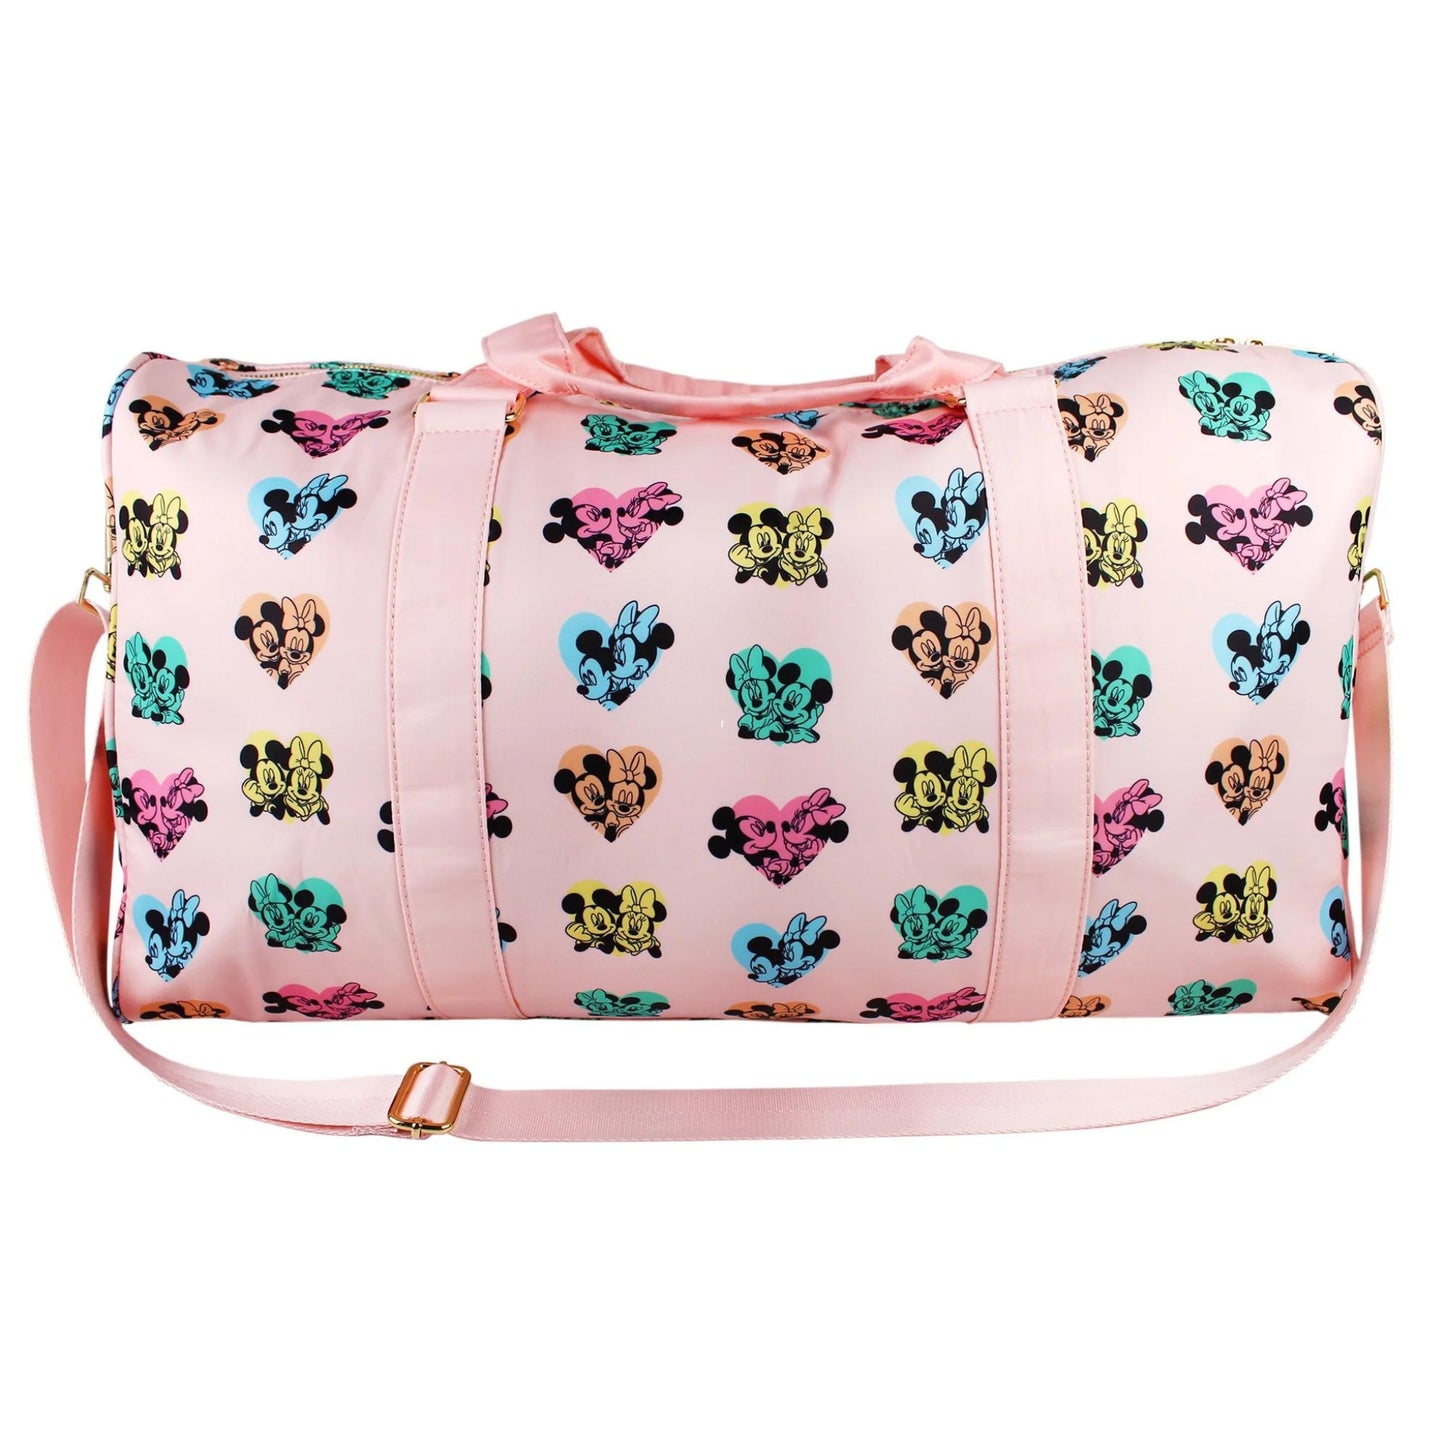 Load image into Gallery viewer, Mickey and Minnie Hearts (Disney) Travel Duffle Bag by Cakeworthy
